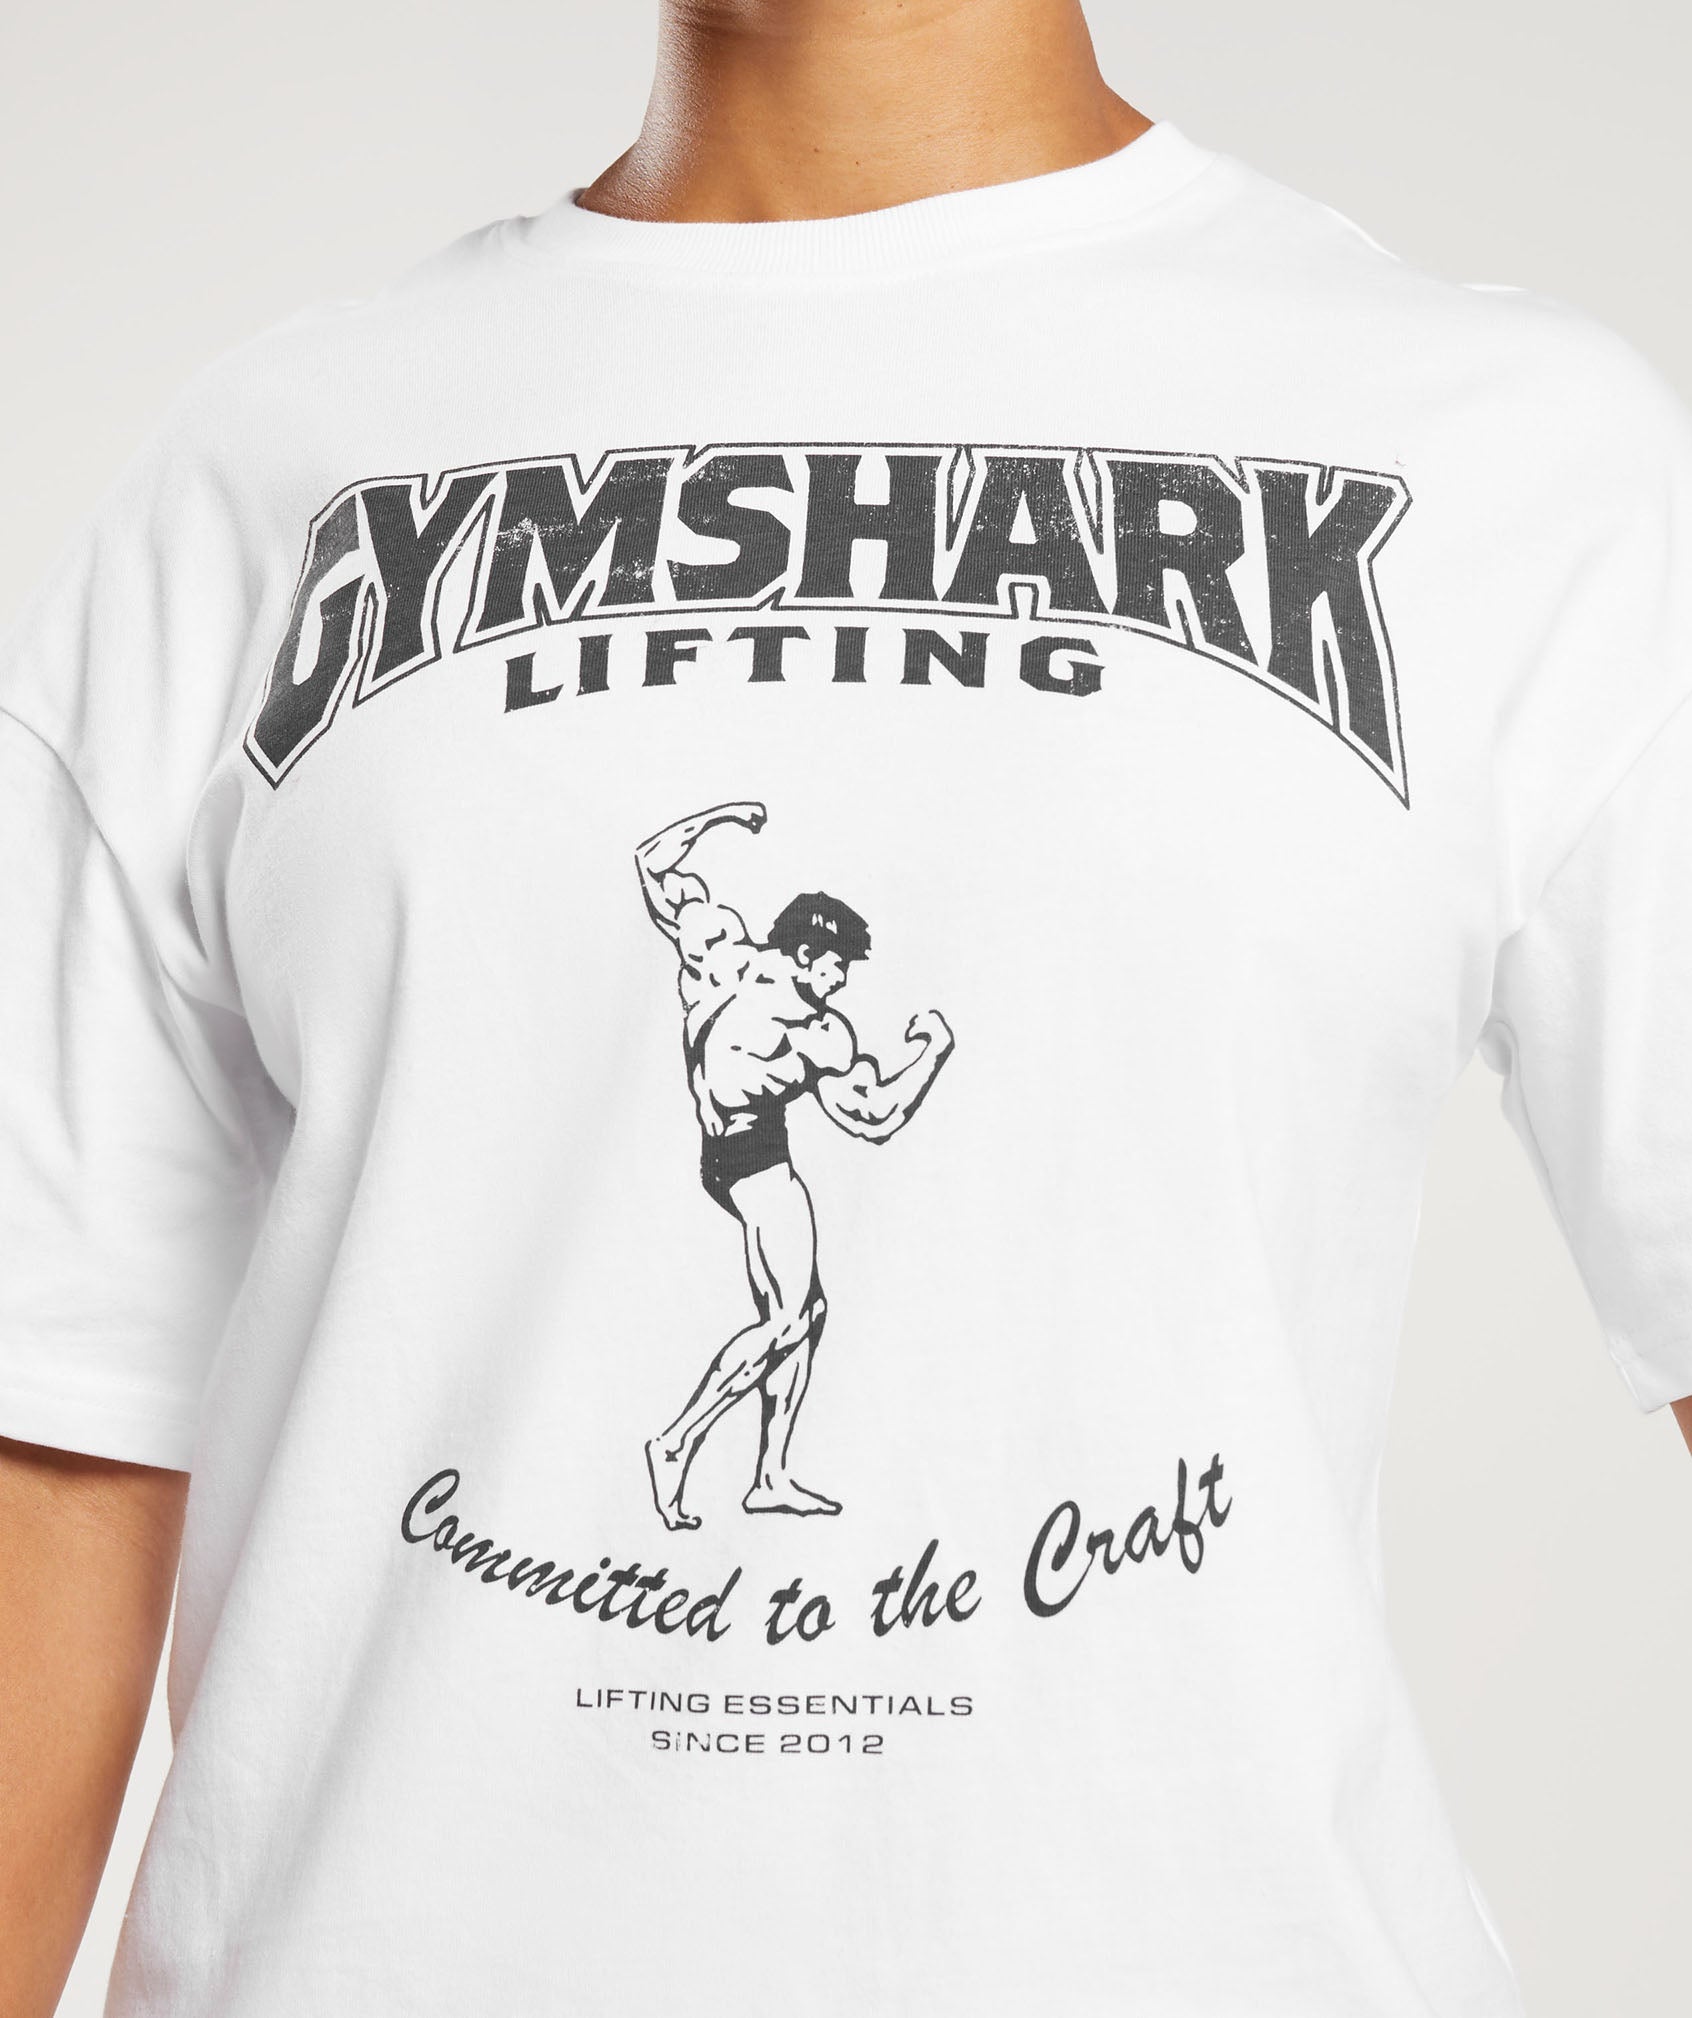 Gymshark Committed To The Craft T-Shirt - White